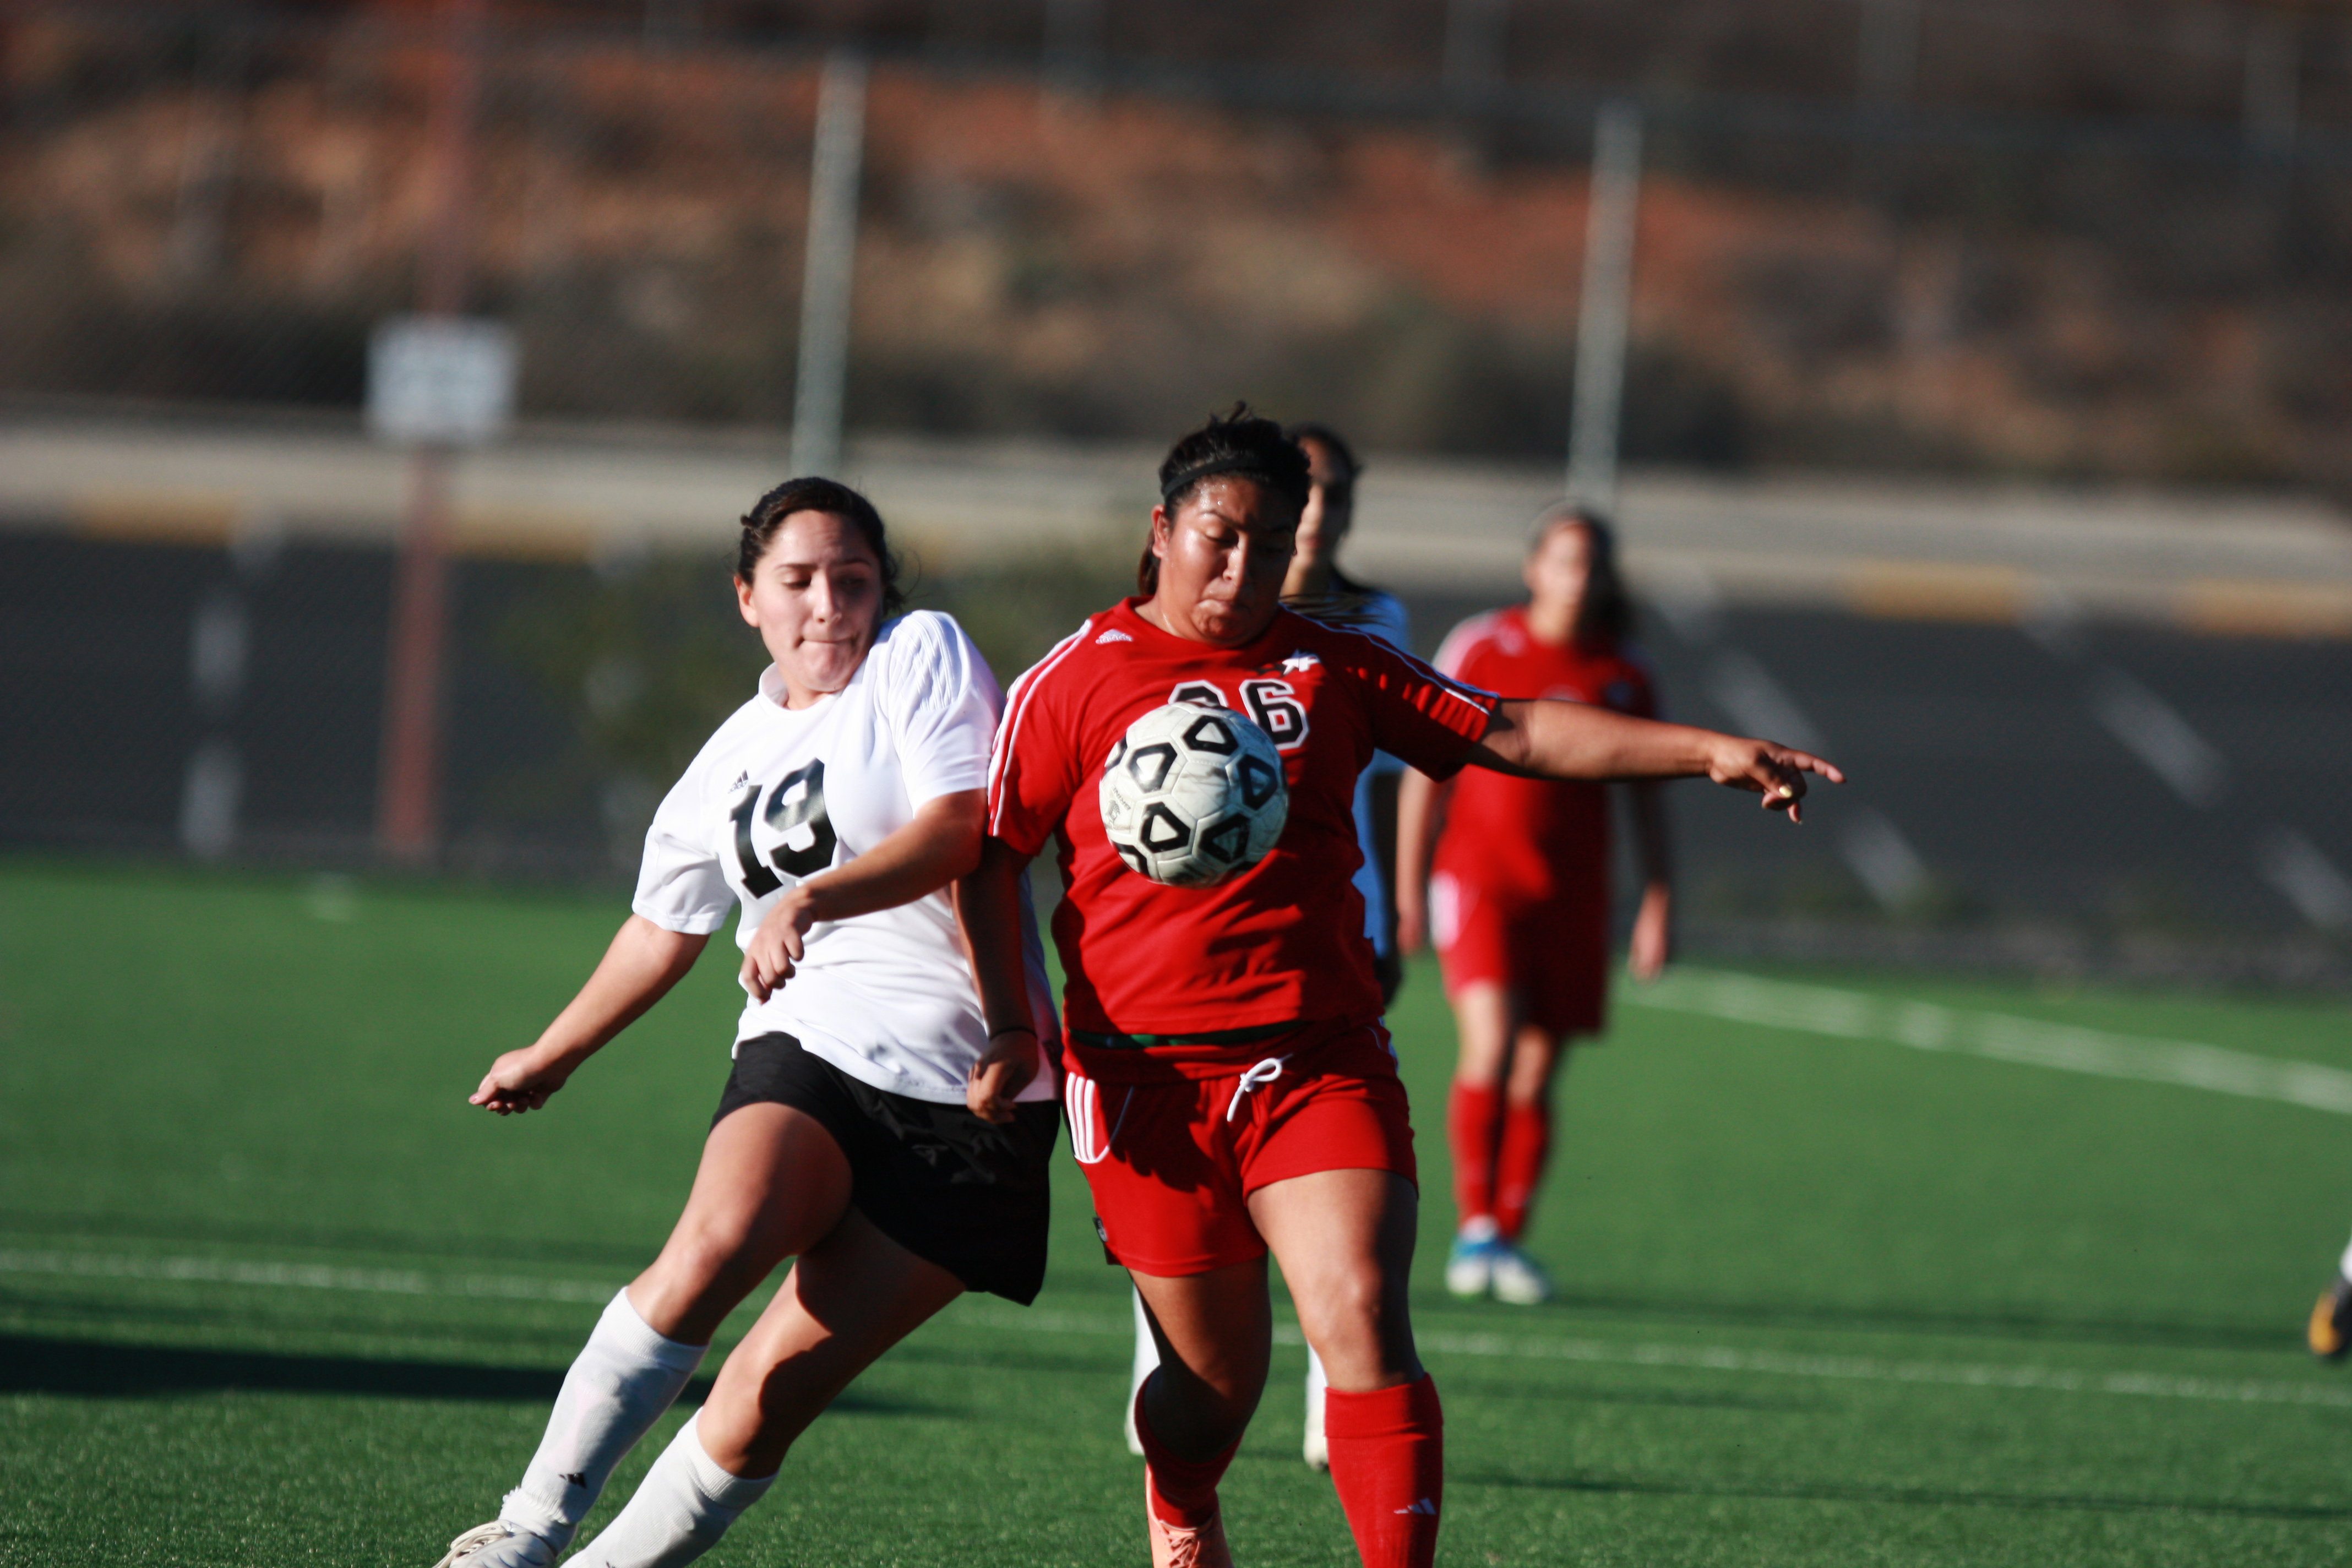 Midfielder Julie Molina (#26) tries to get to the ball before her opponent from Imperial Valley College can get to it in a women's soccer game at Minkhoff Field. The Comets pulled off an impressive 4-0 win against The Arabs. • Scott Colson/Telescope